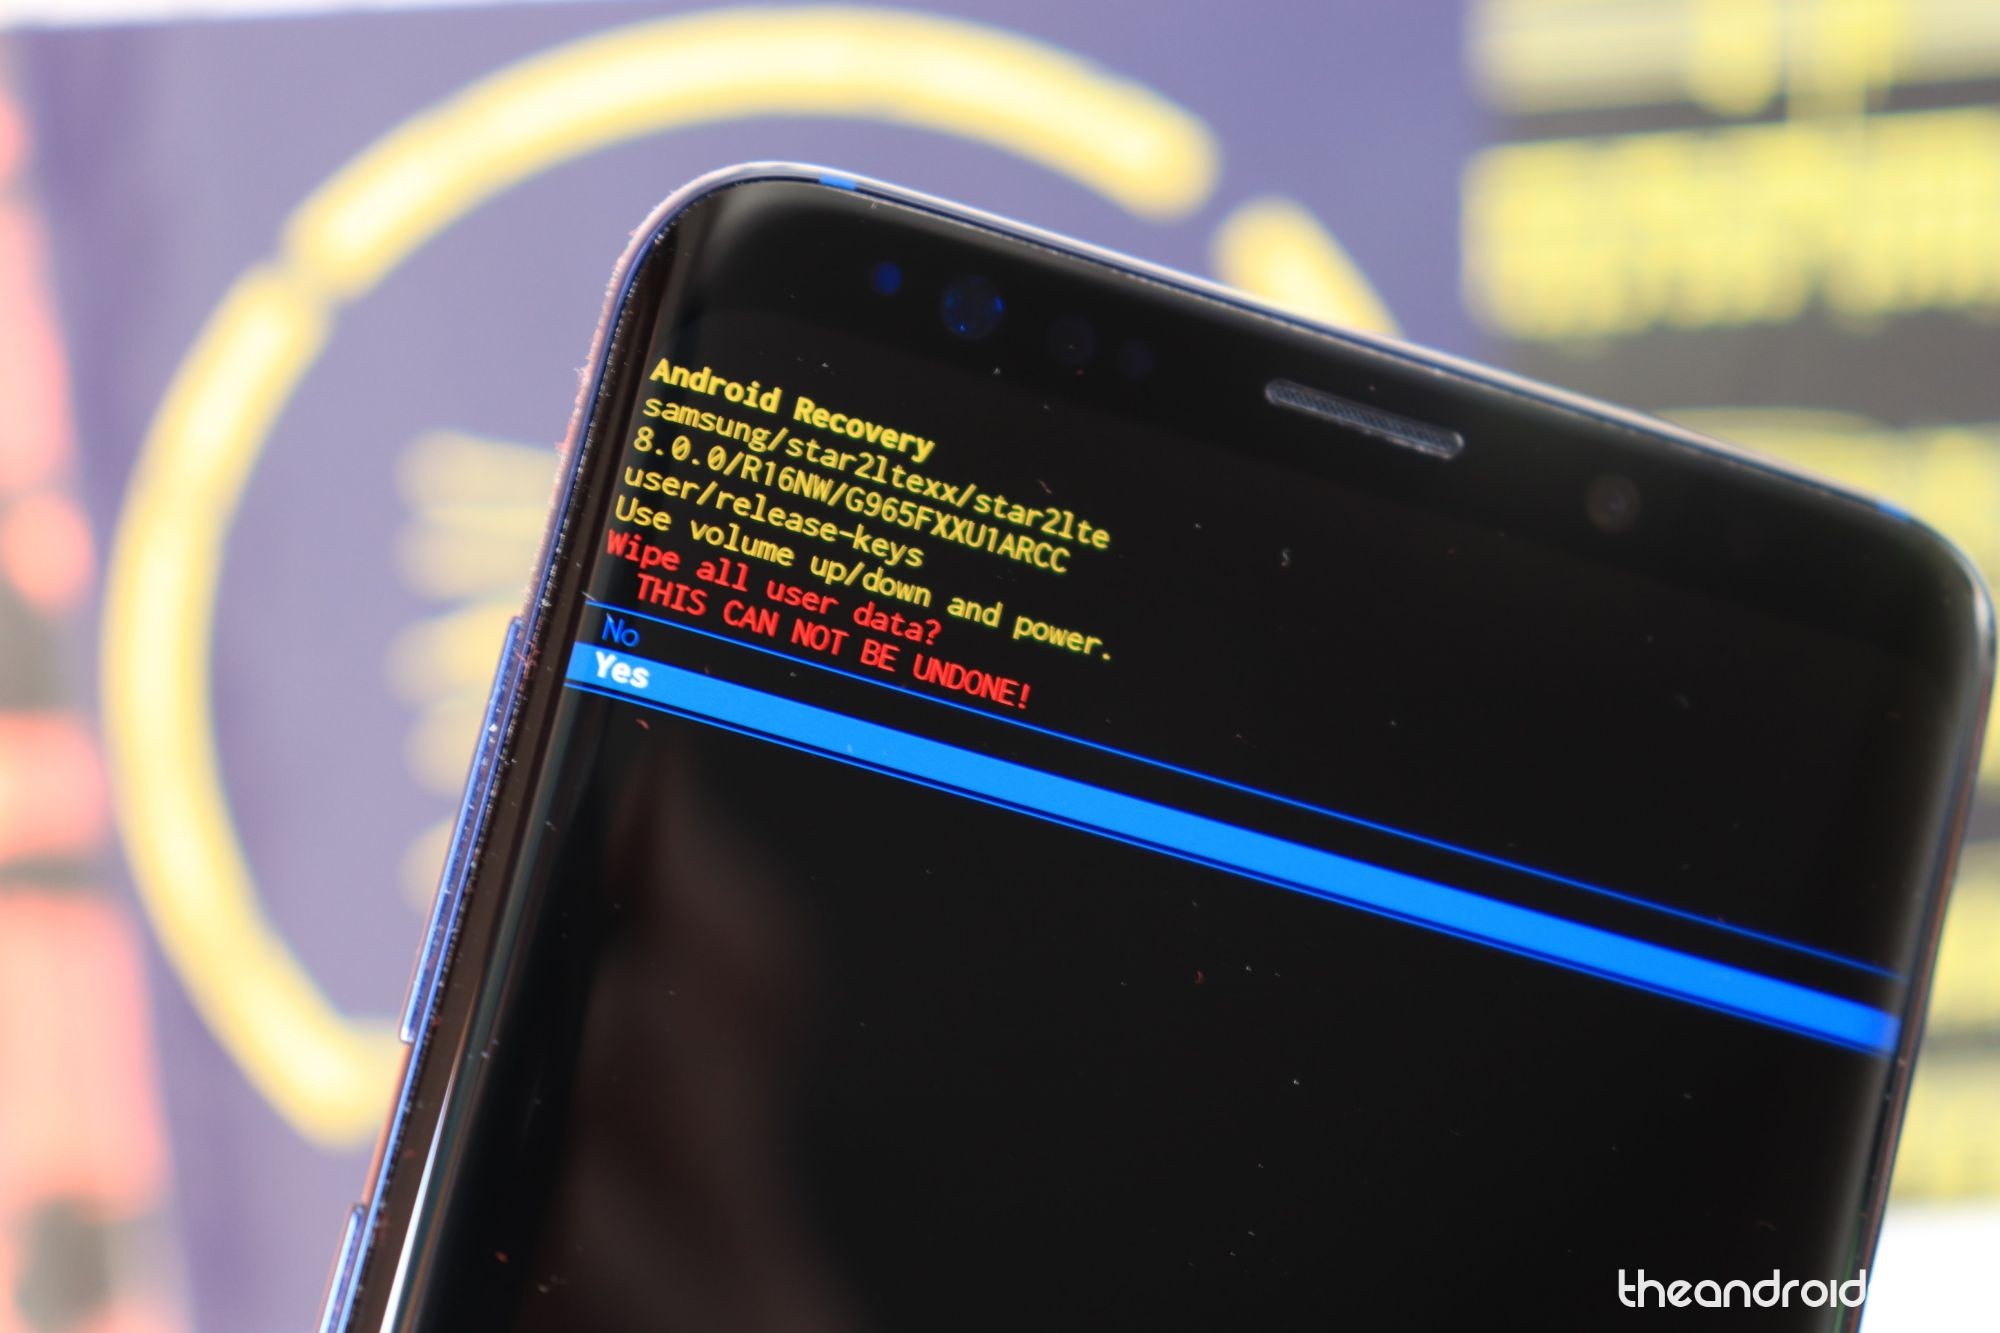 How to factory reset an Android device